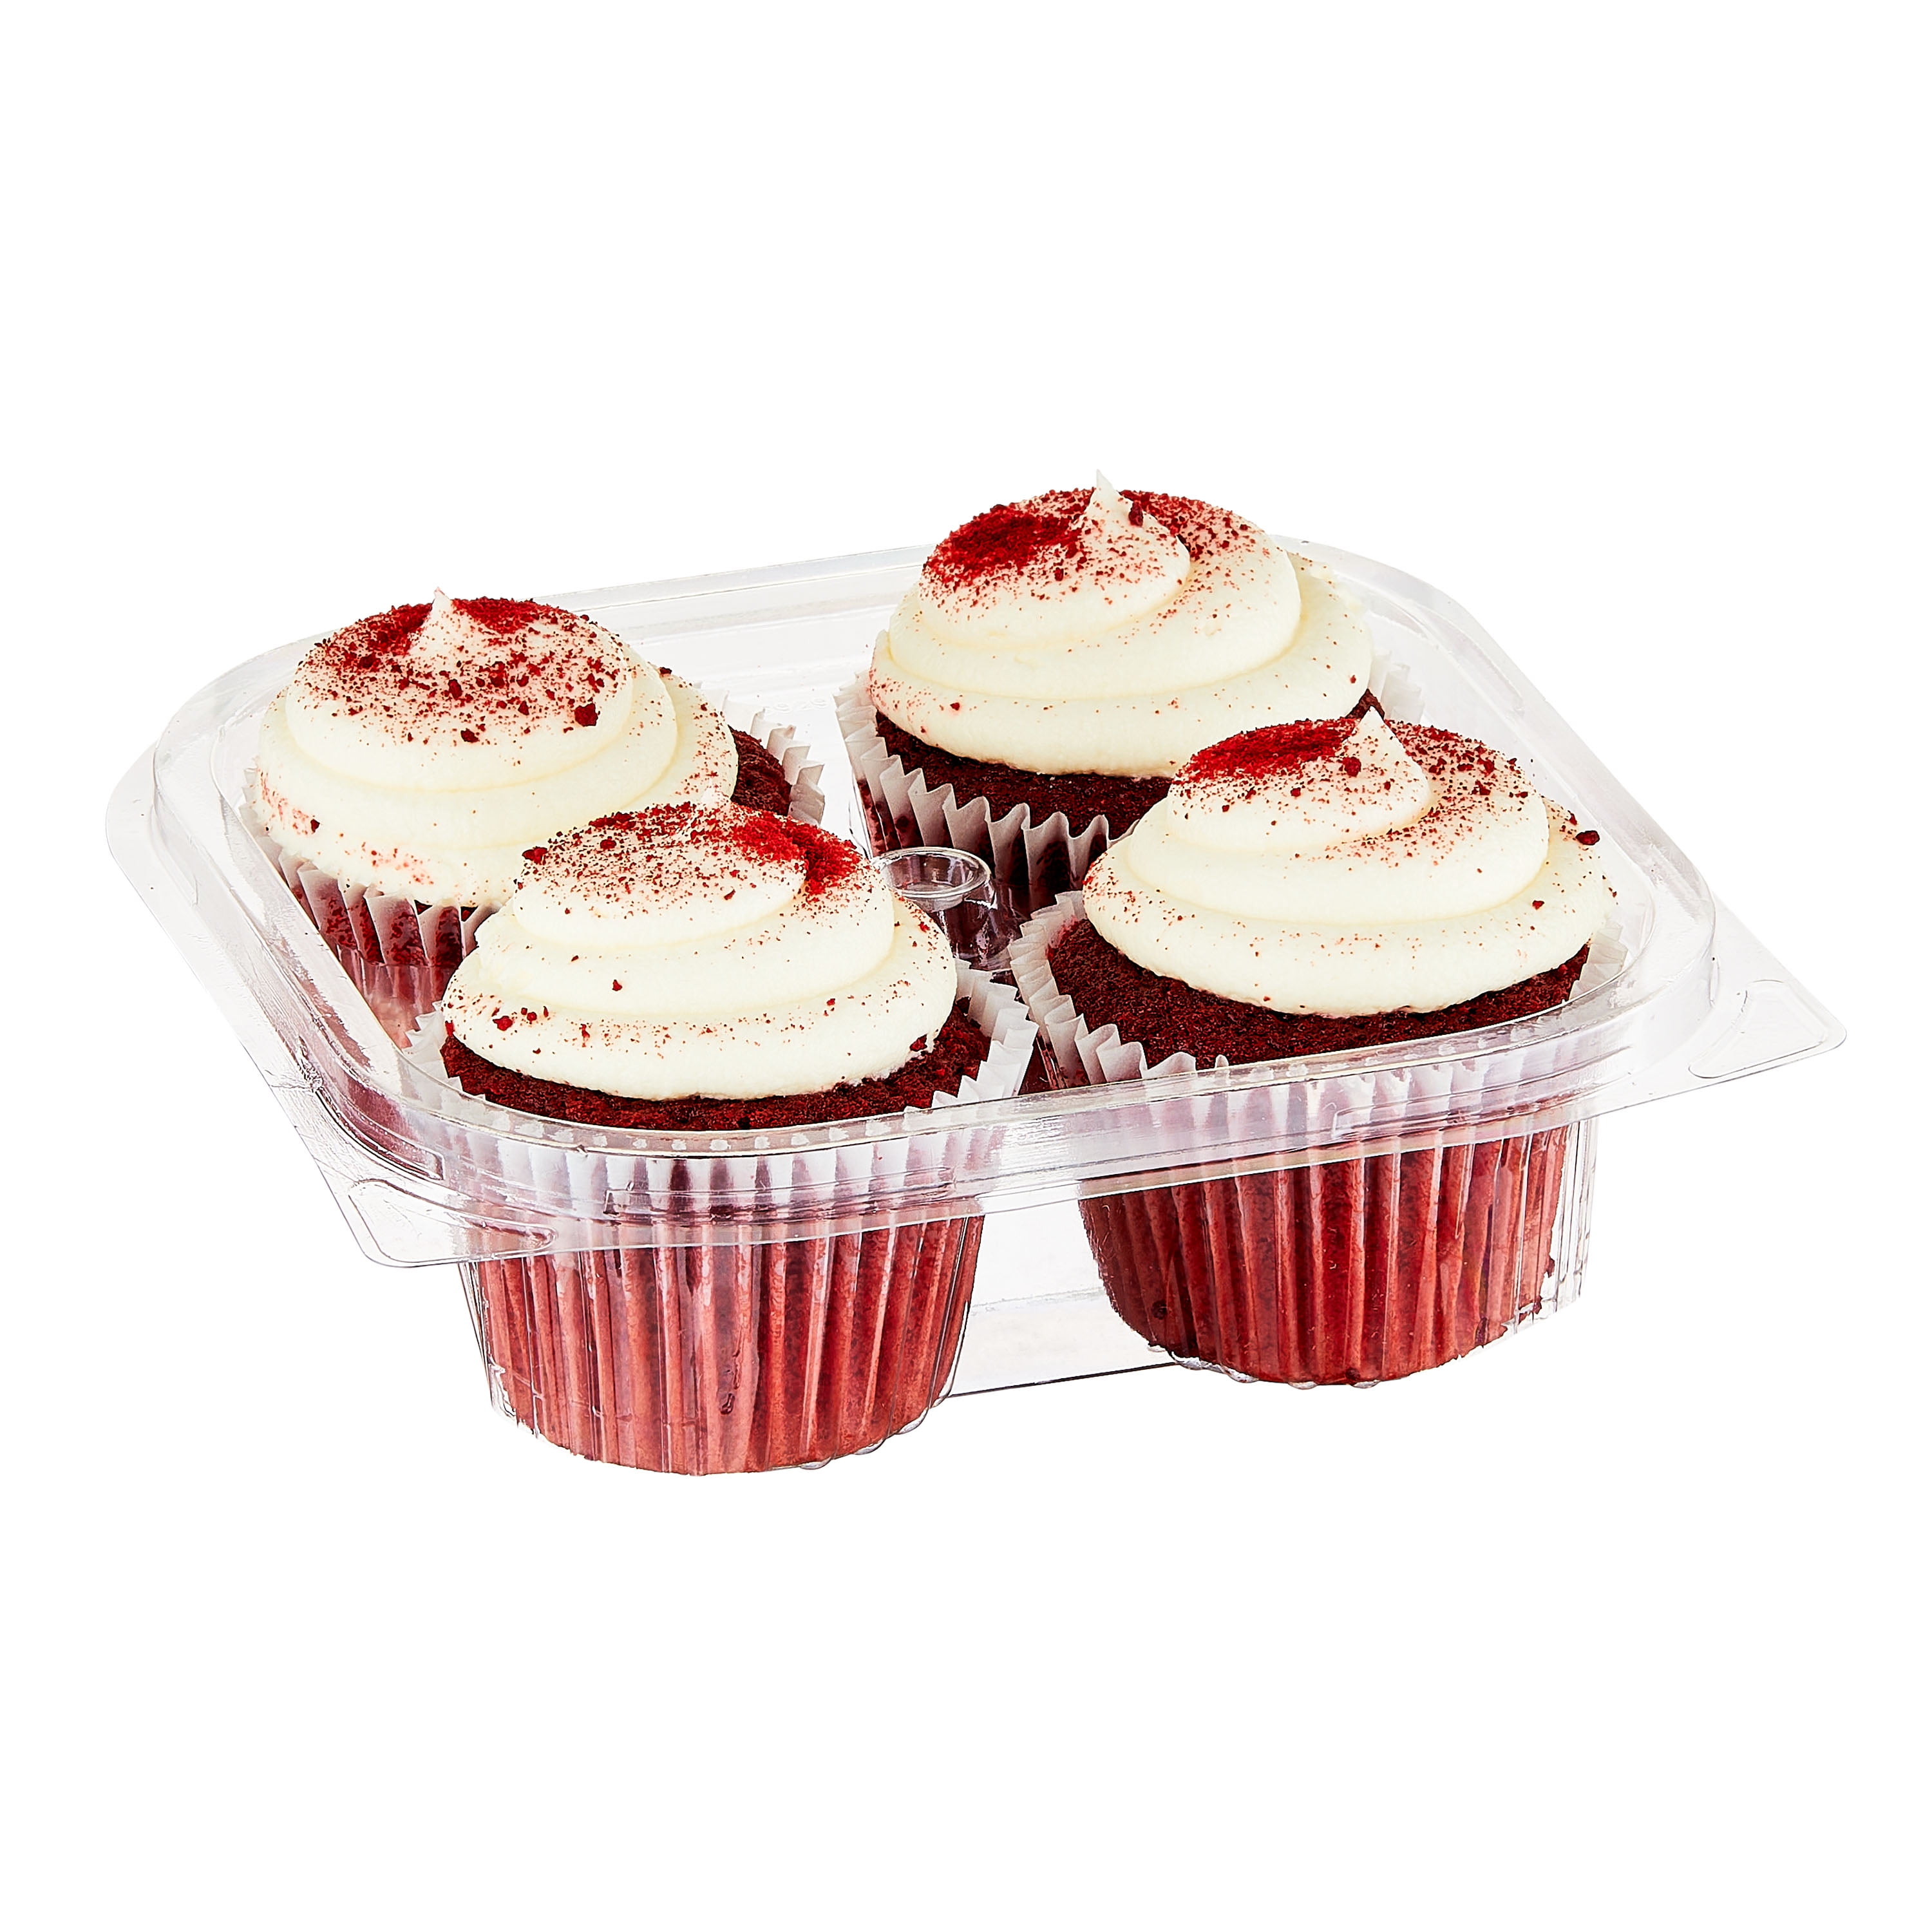 REVIEW: Hostess Limited Edition Red Velvet CupCakes - The Impulsive Buy